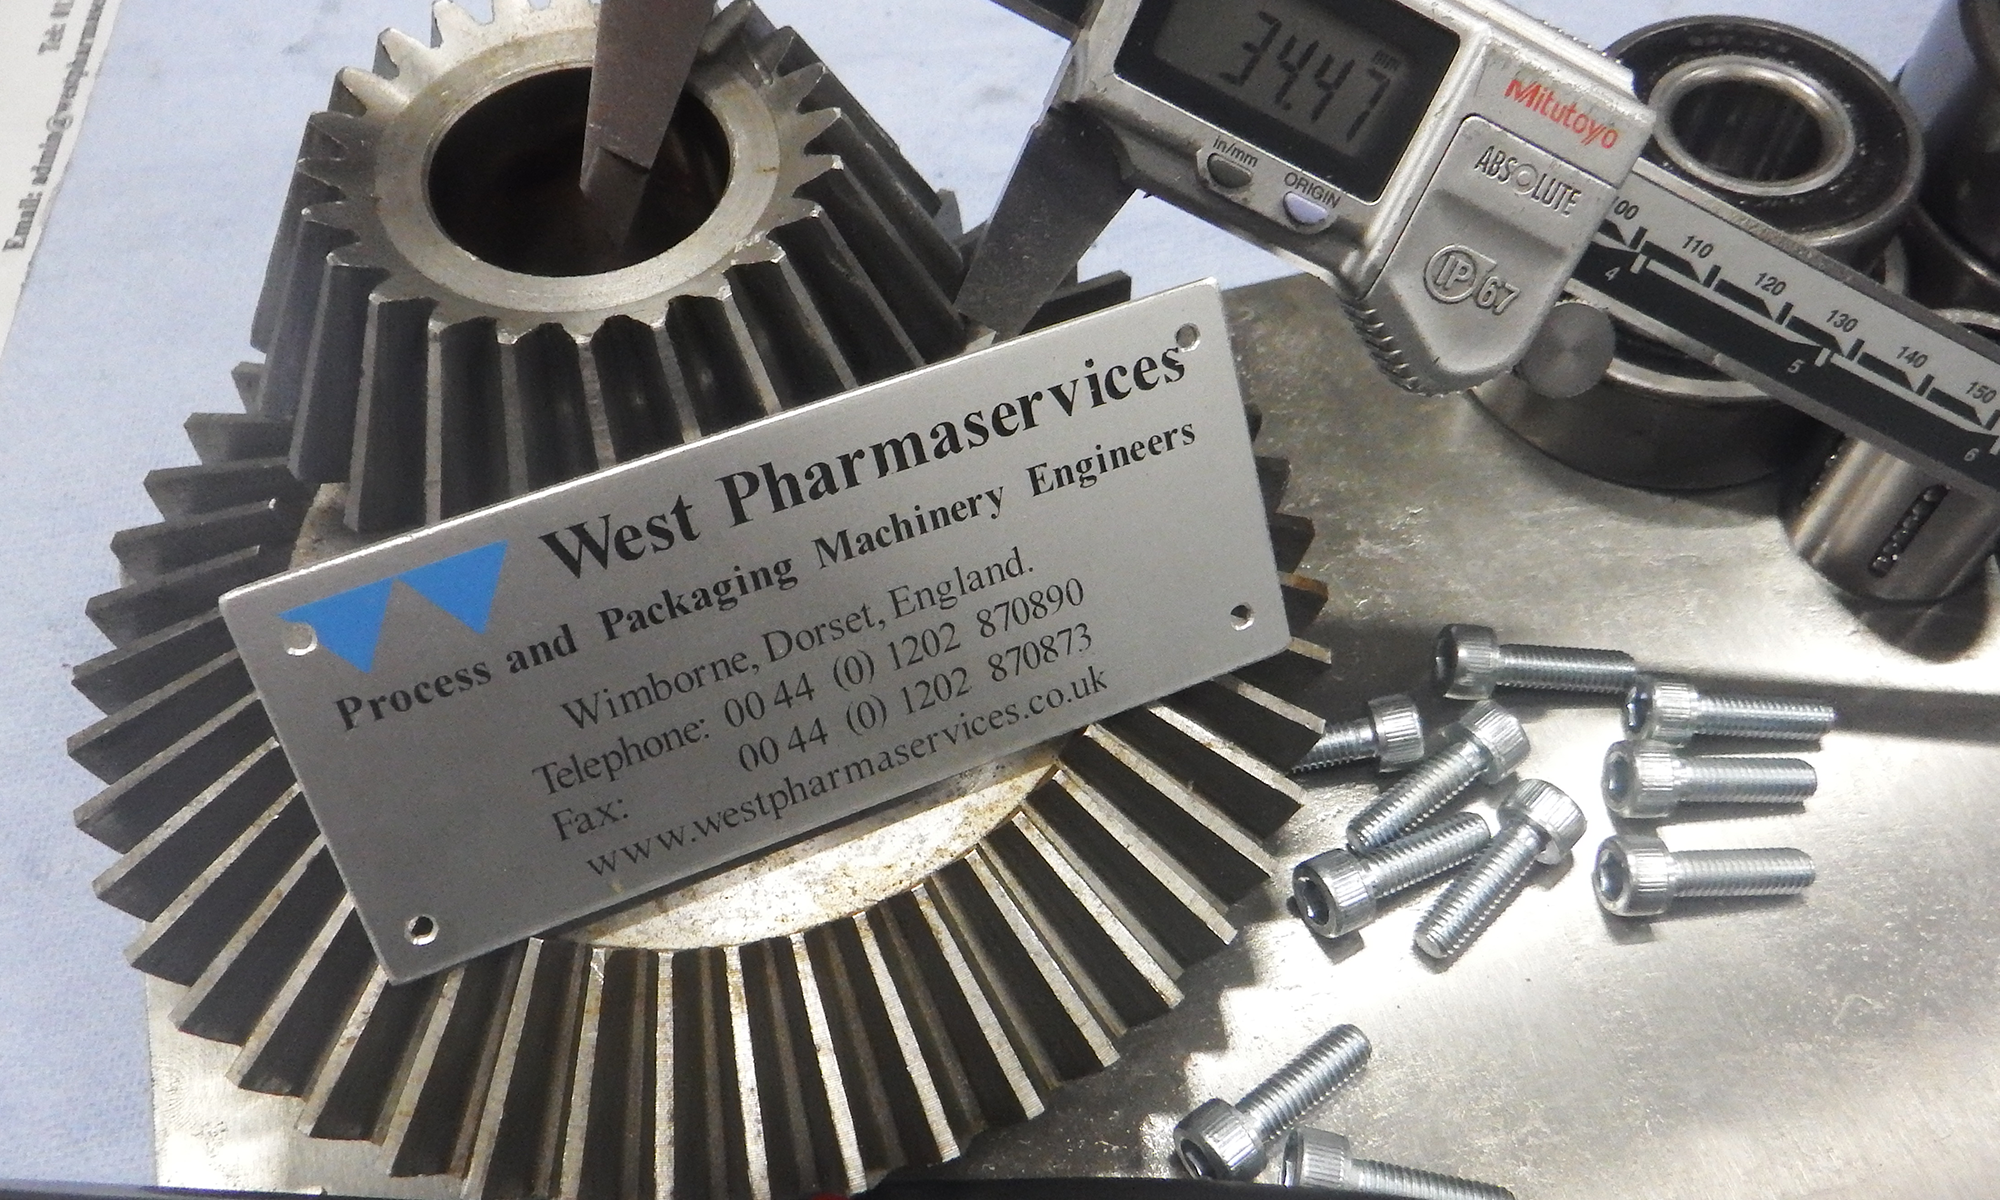 About West Pharmaservices Bespoke machinery